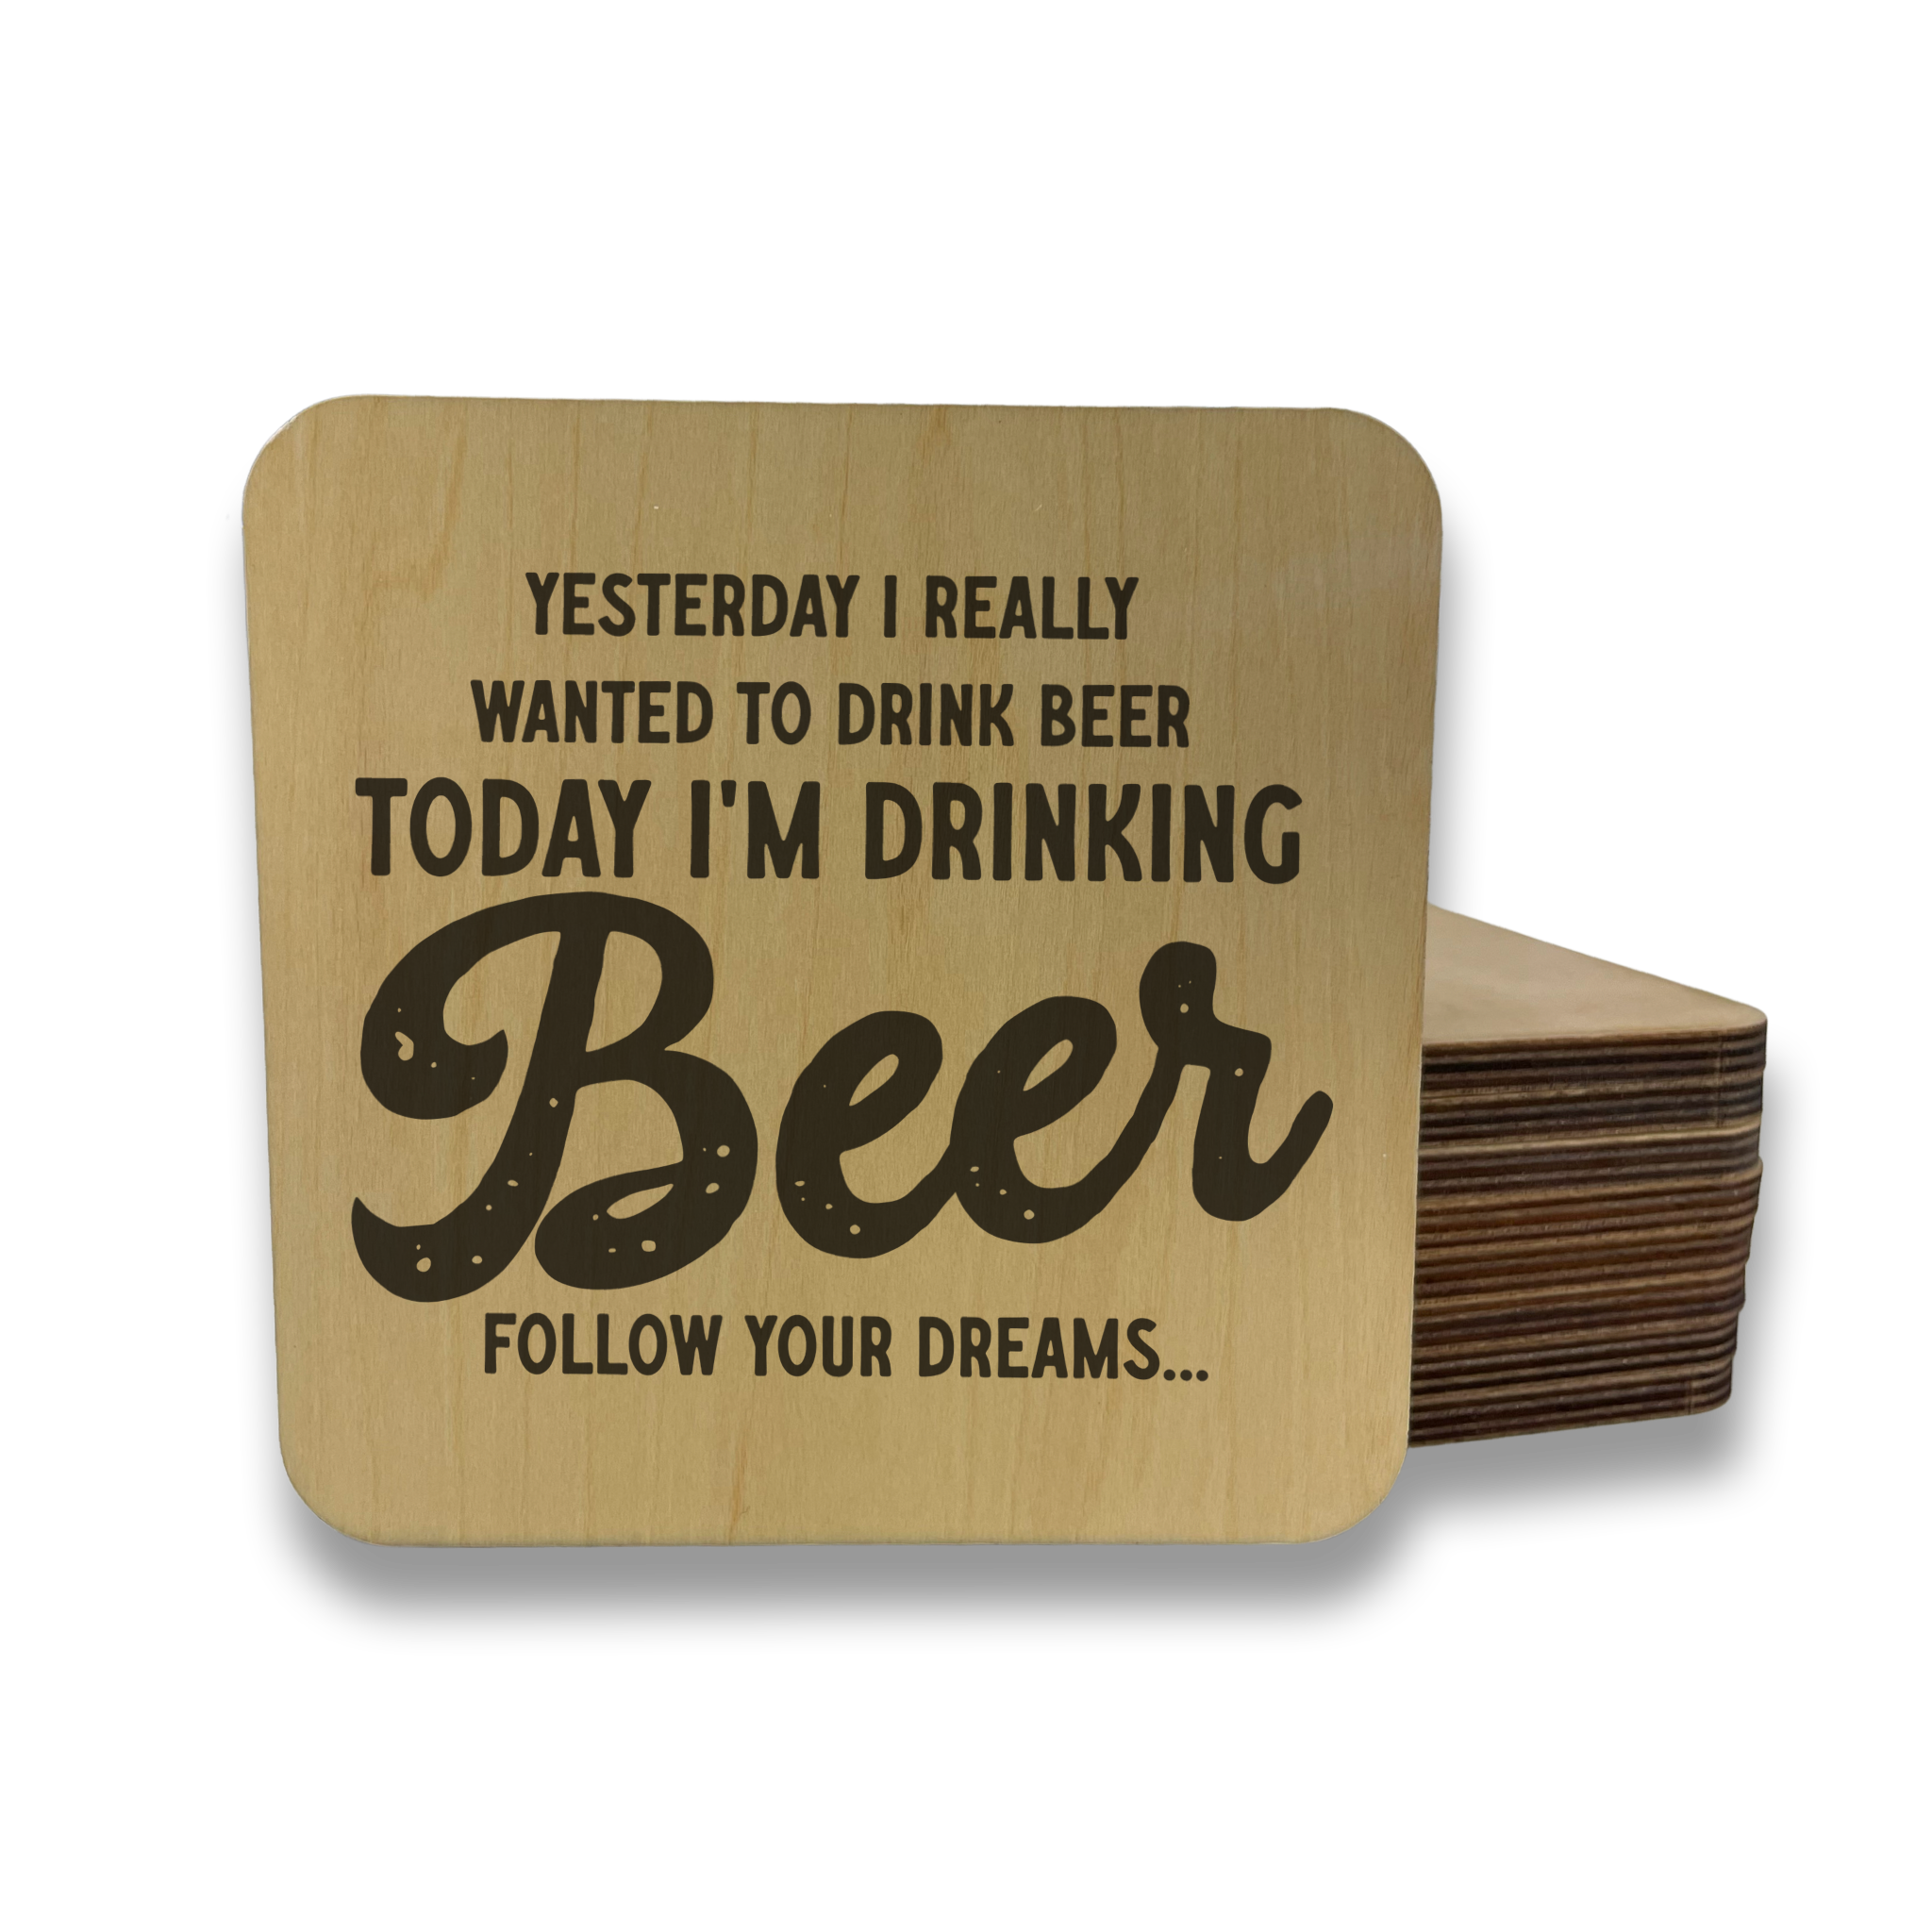 TODAY I'M DRINKING BEER, FOLLOW YOUR DREAMS DK MAGNET / DRINK COASTER